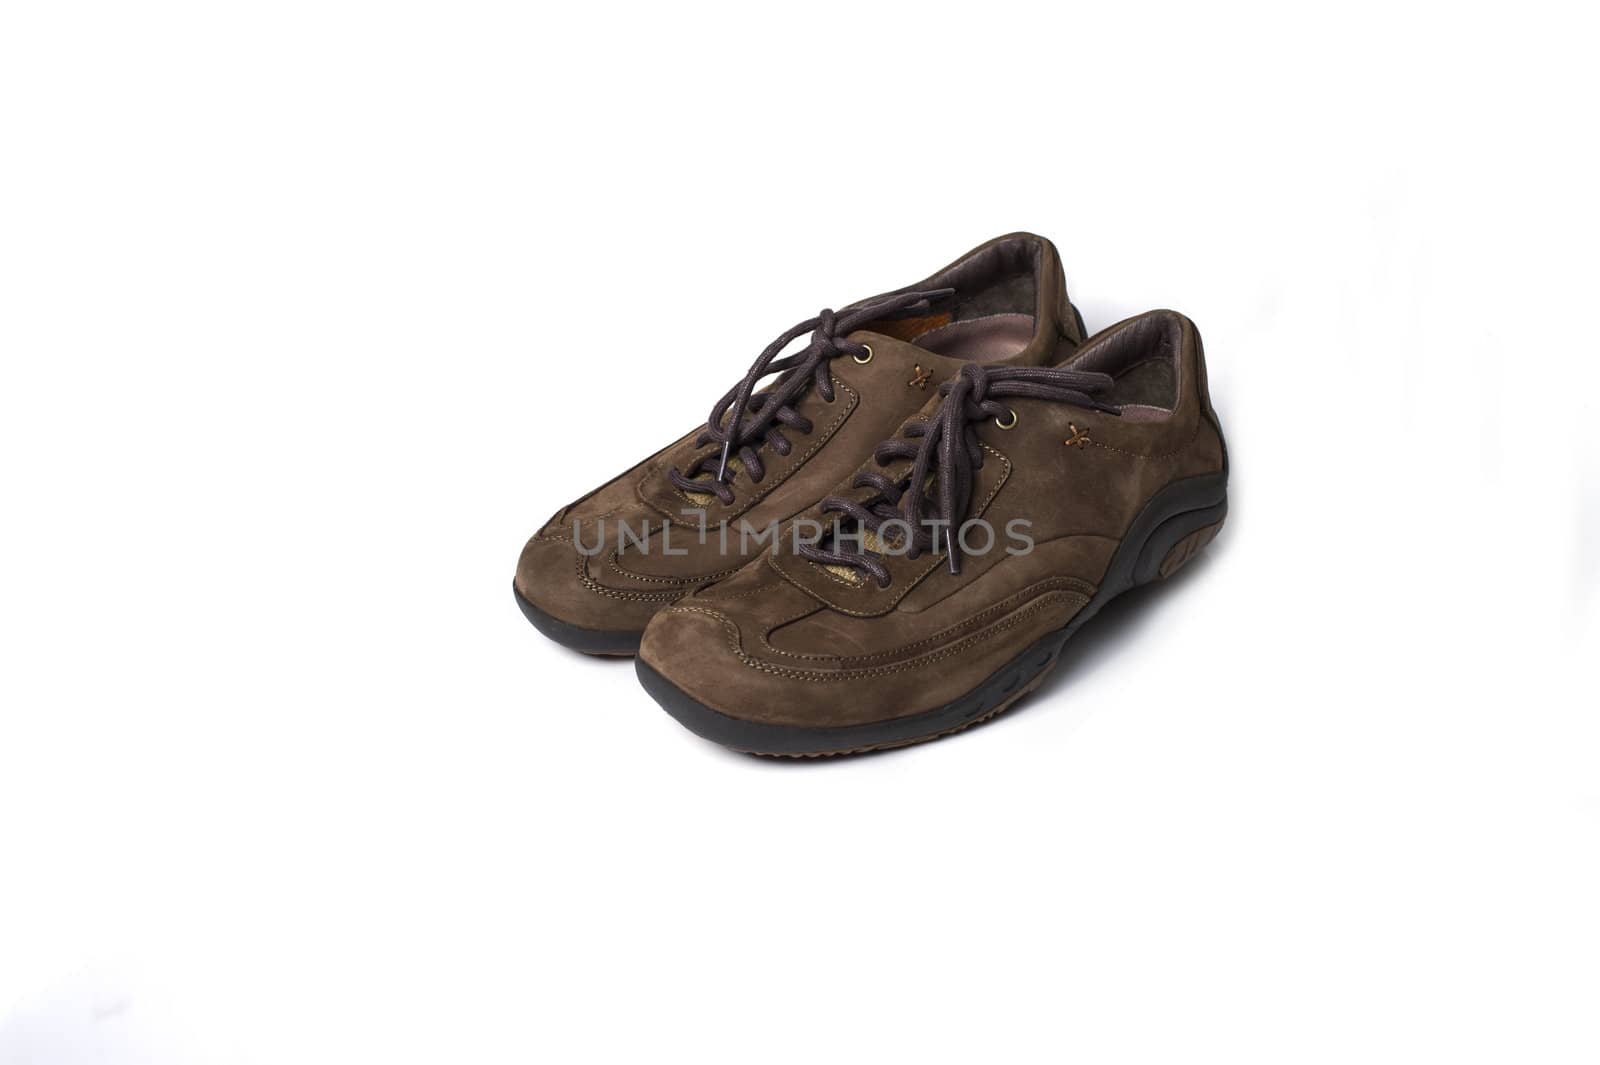 A brown shoe isolated on a white background